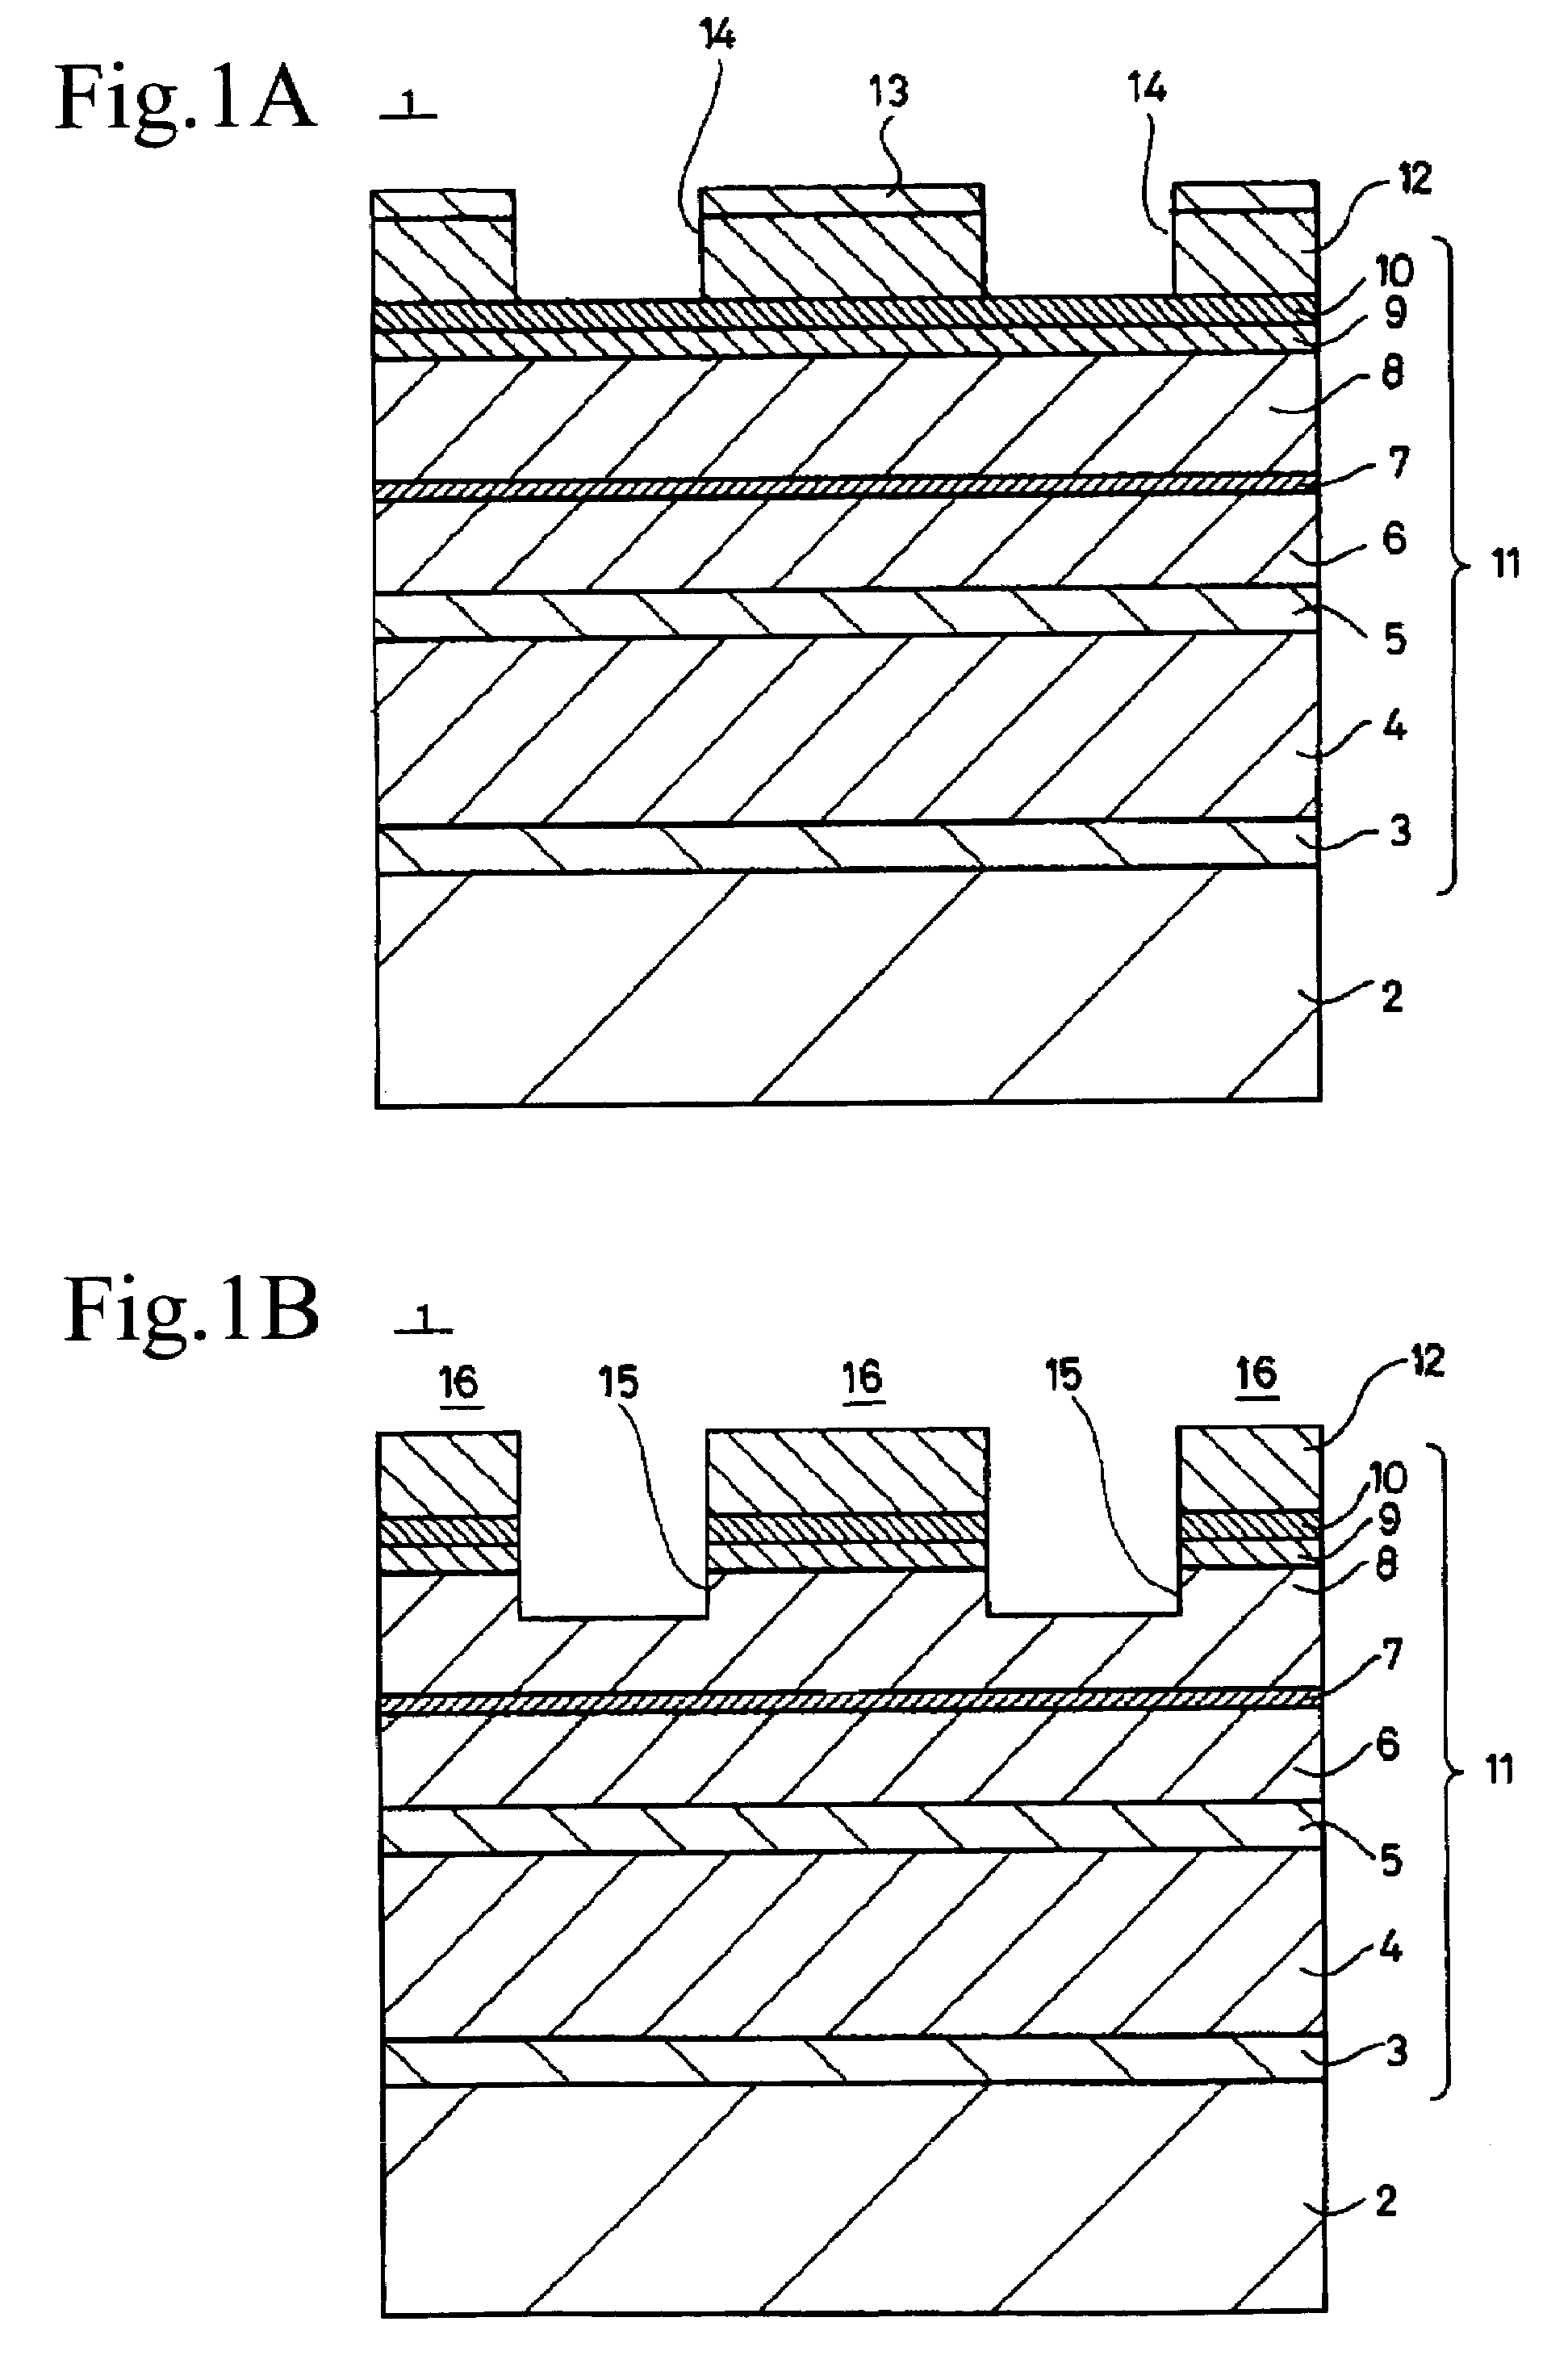 Method of manufacturing semiconductor light emitting device